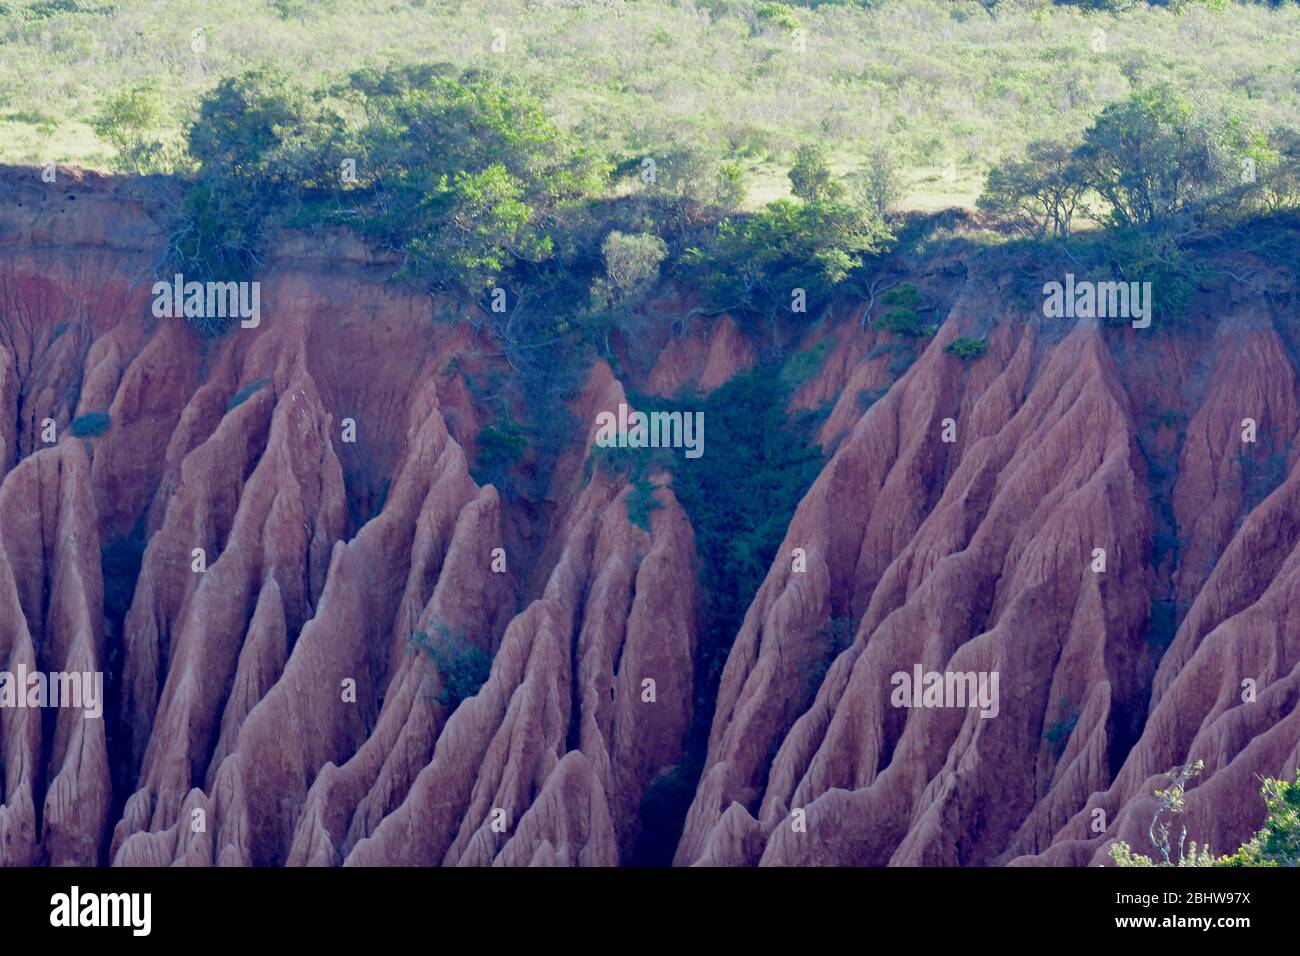 Serious soil erosion in Addo Elephant National Park, South Africa Stock Photo